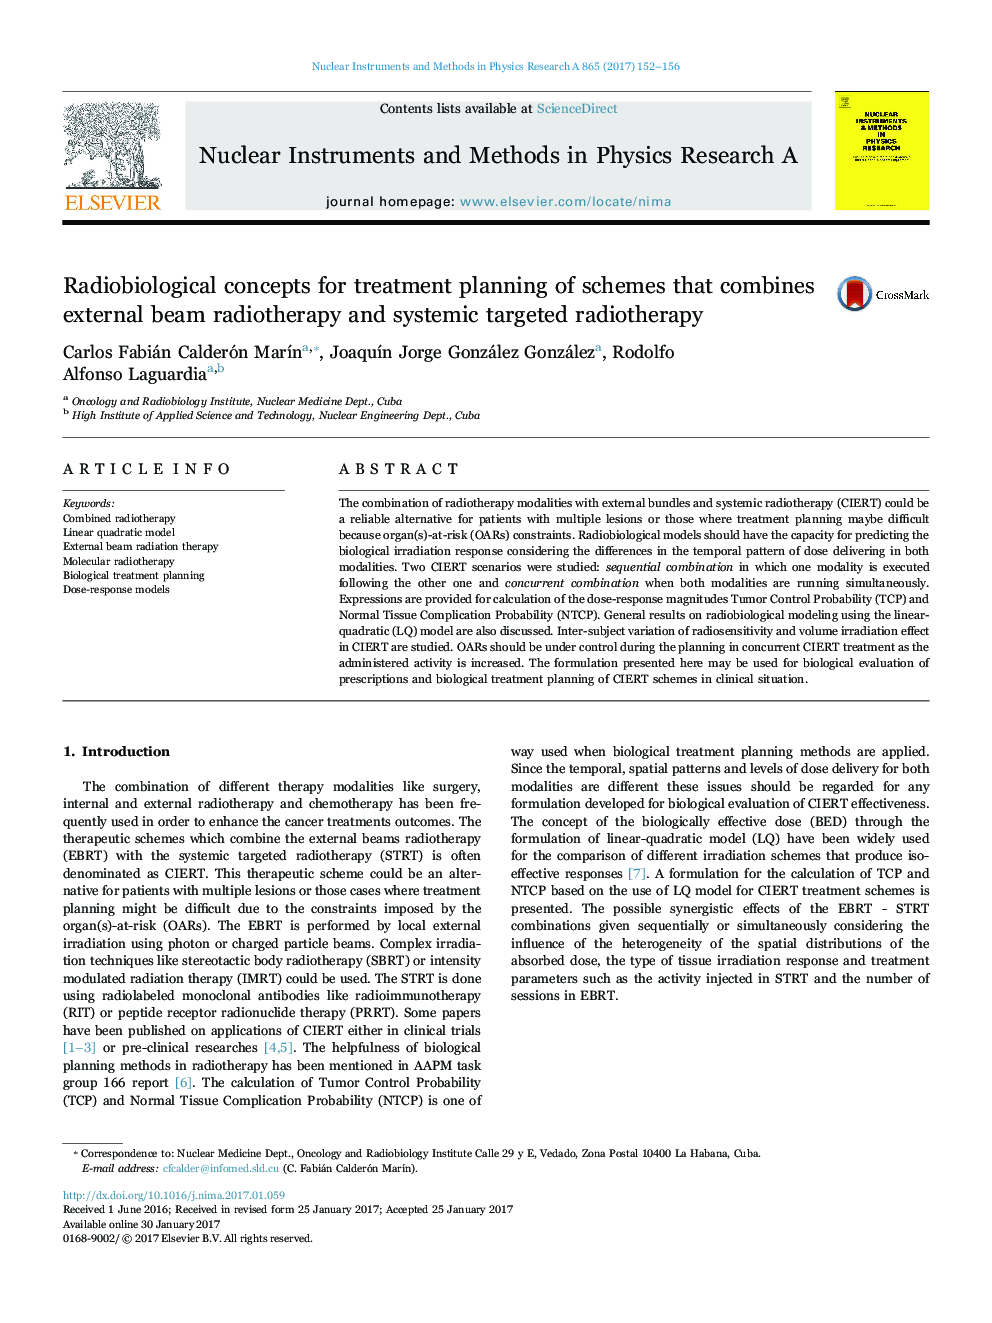 Radiobiological concepts for treatment planning of schemes that combines external beam radiotherapy and systemic targeted radiotherapy